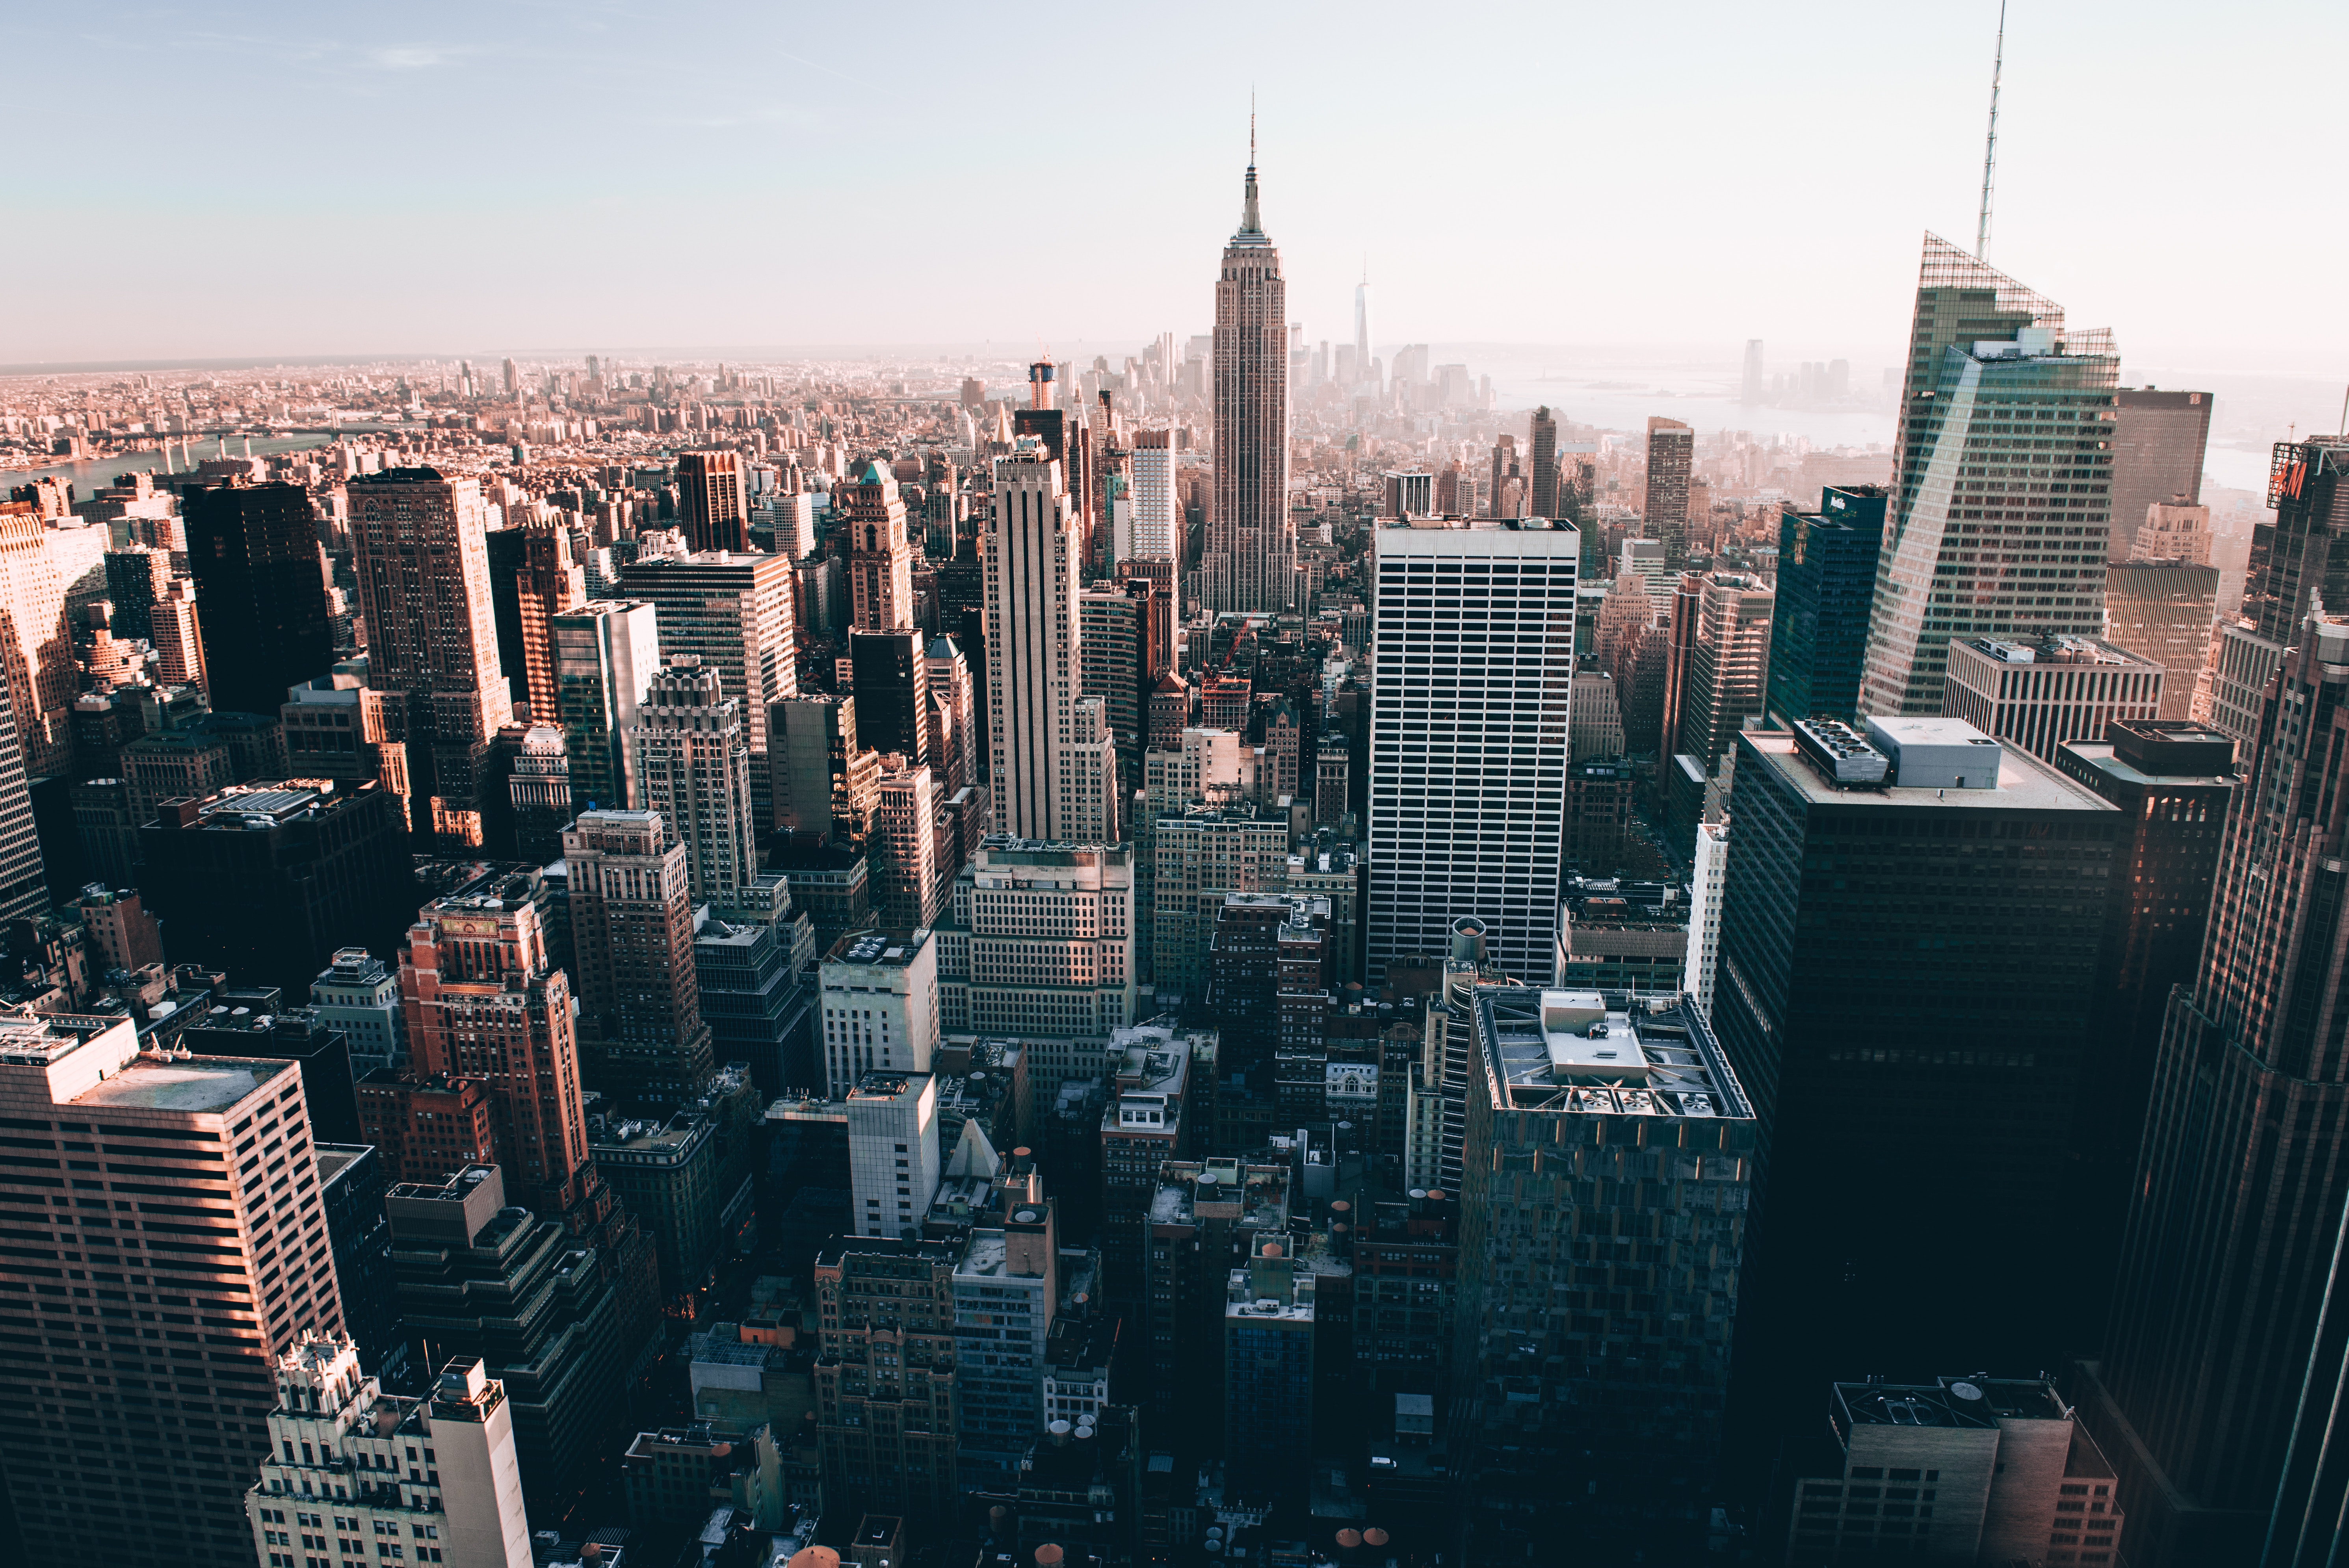 usa, cities, view from above, skyscrapers, united states, new york